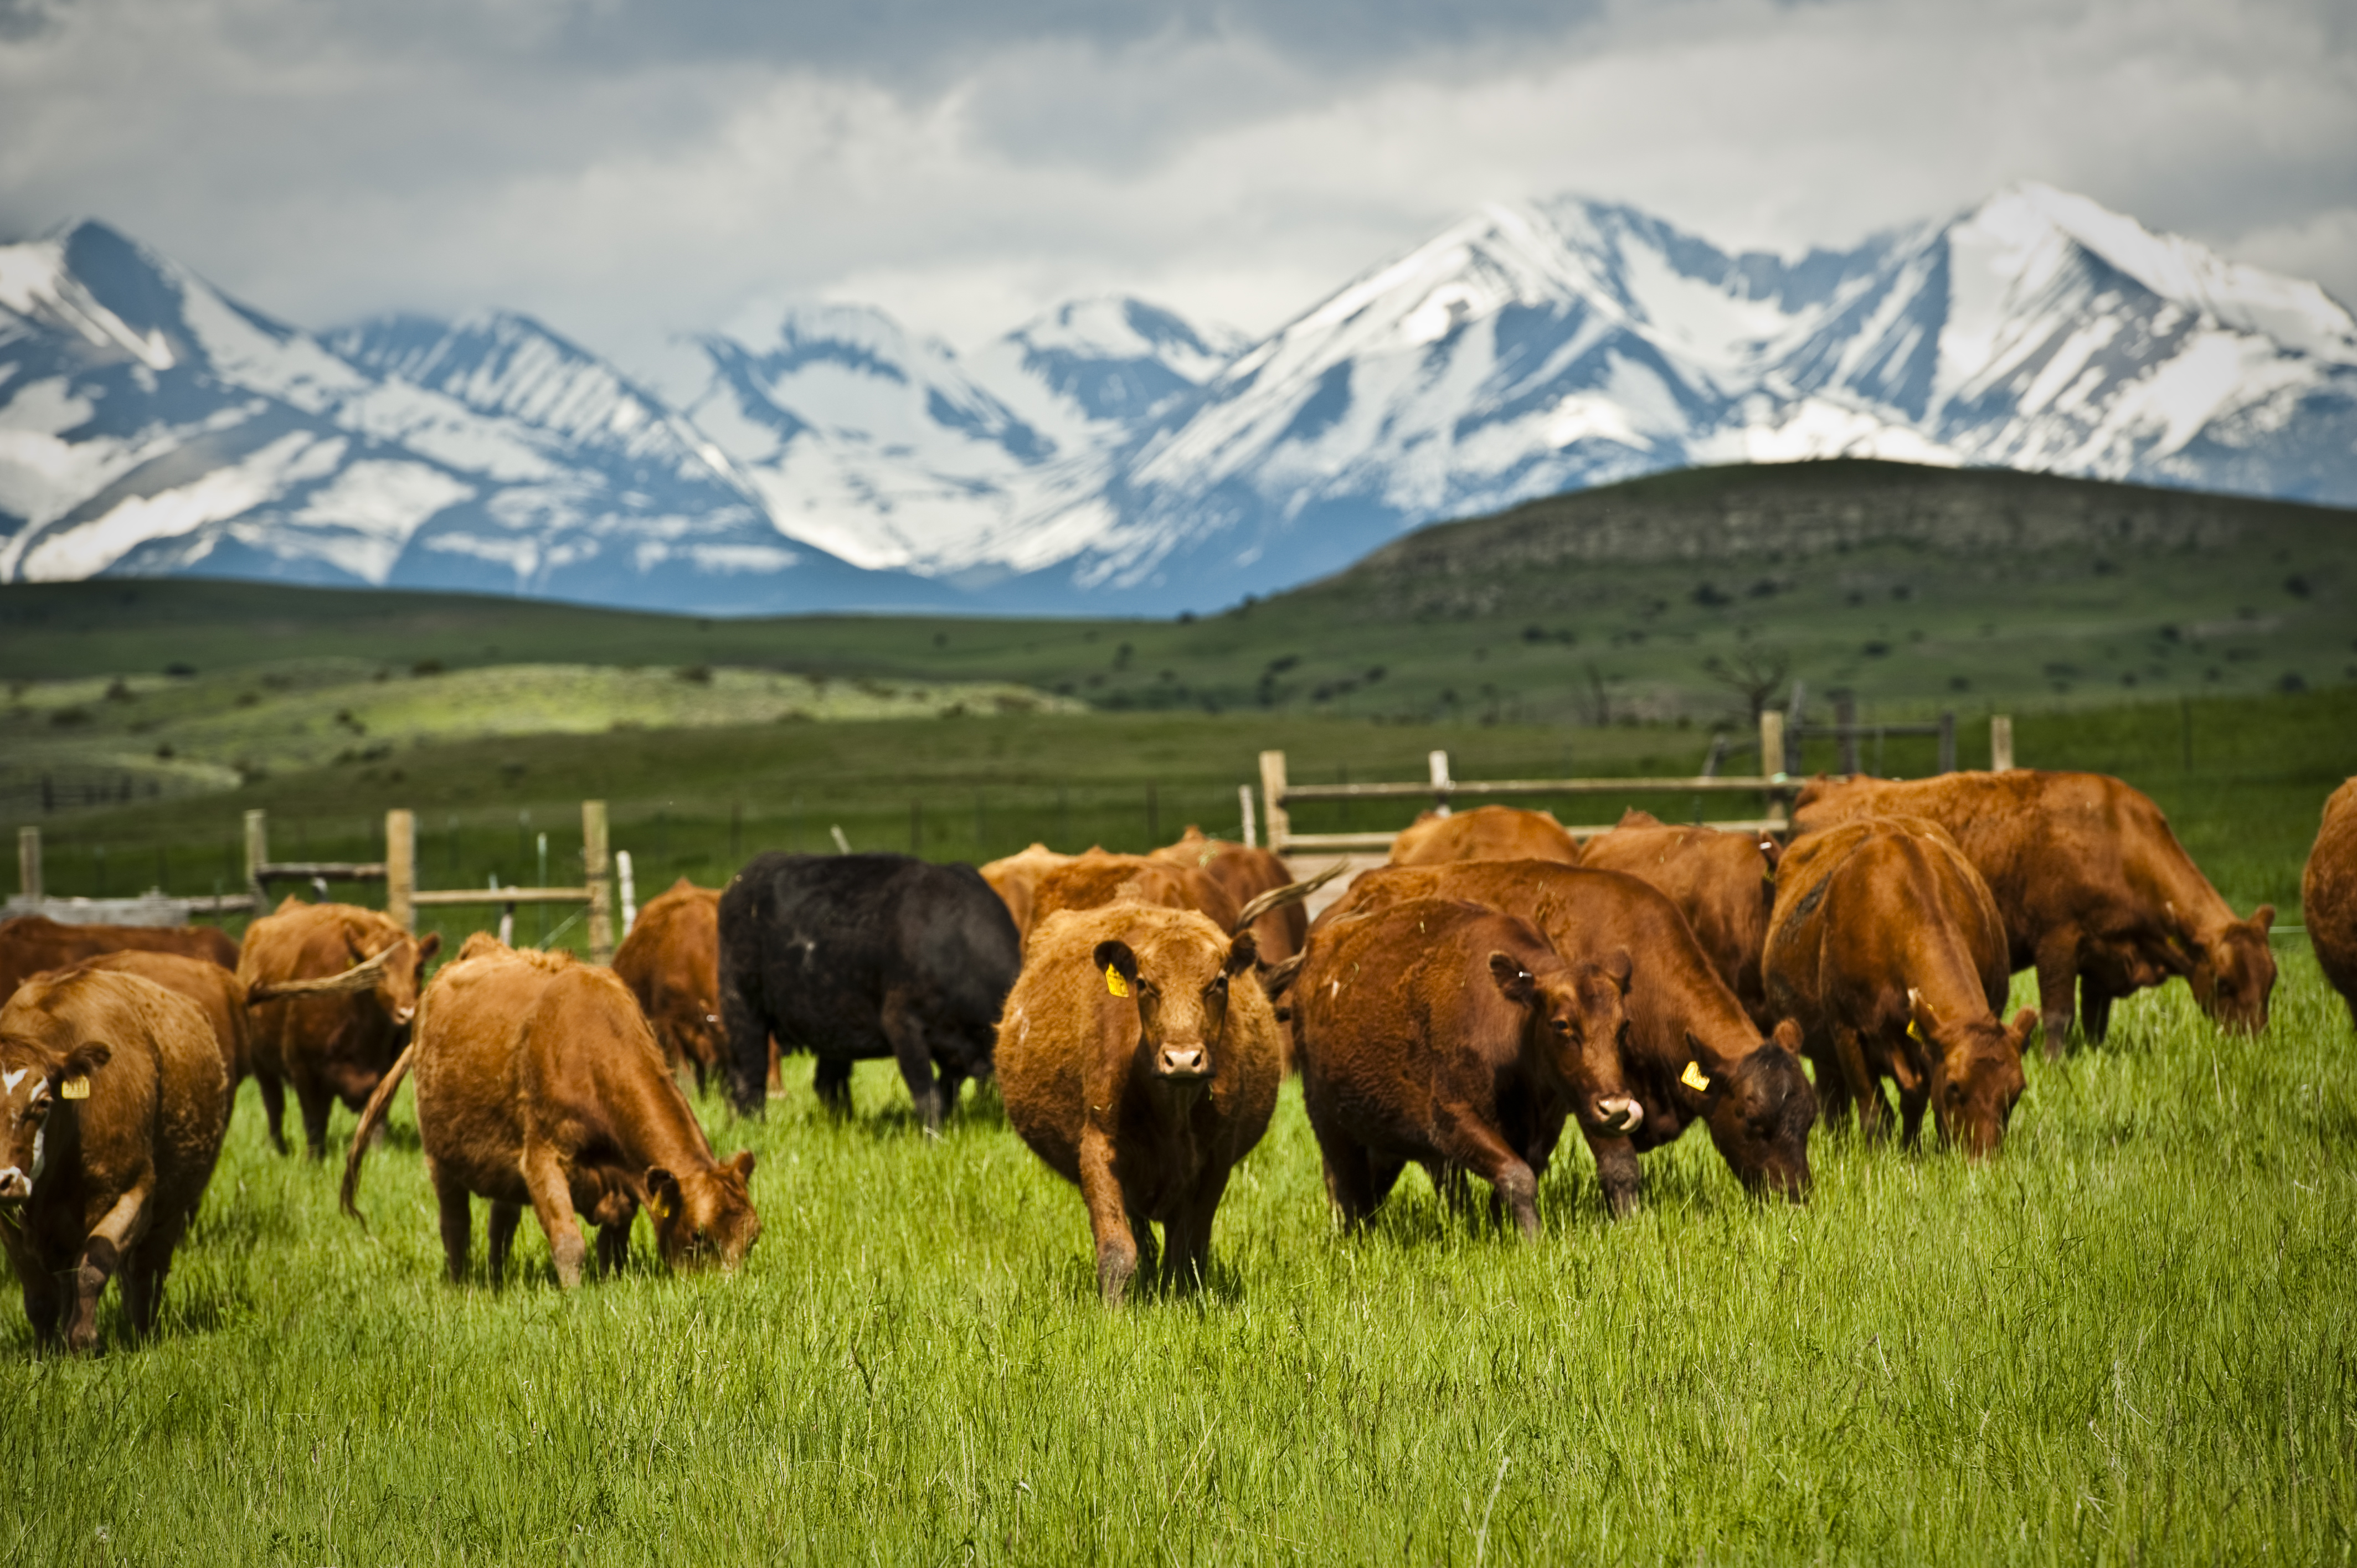 The Blake's Red Angus and Black Angus cattle backed by the Crazy Mountains.